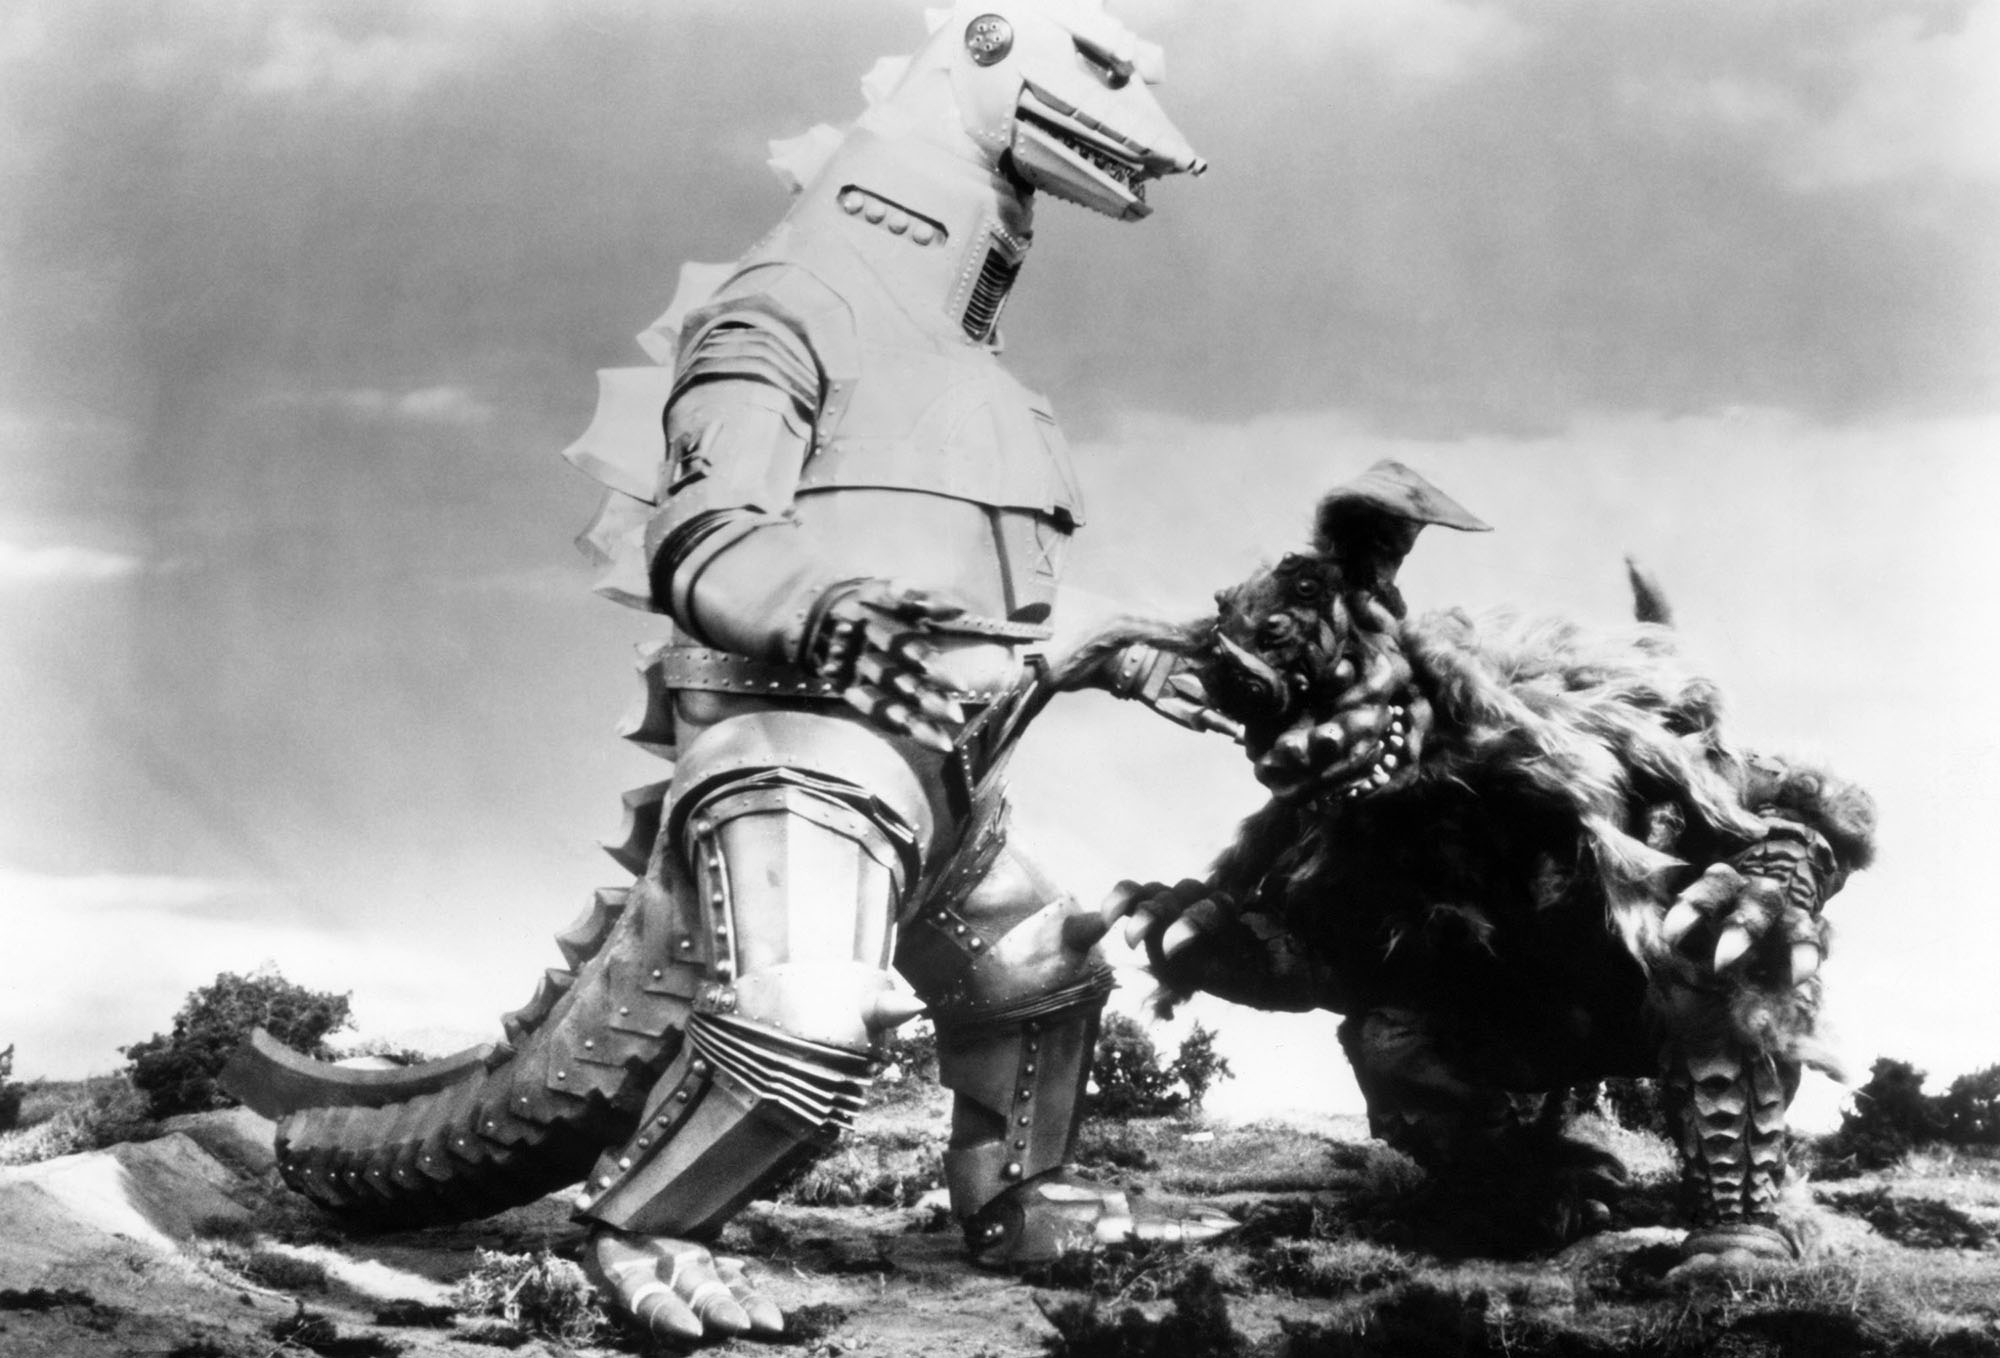 black and white image from the 1974 movie "Godzilla vs. Mechagodzilla." It shows a fight between the robotic Mechagodzilla, standing on the left, and the lion-like monster King Caesar, who is lowering himself to head-butt his enemy from the right.